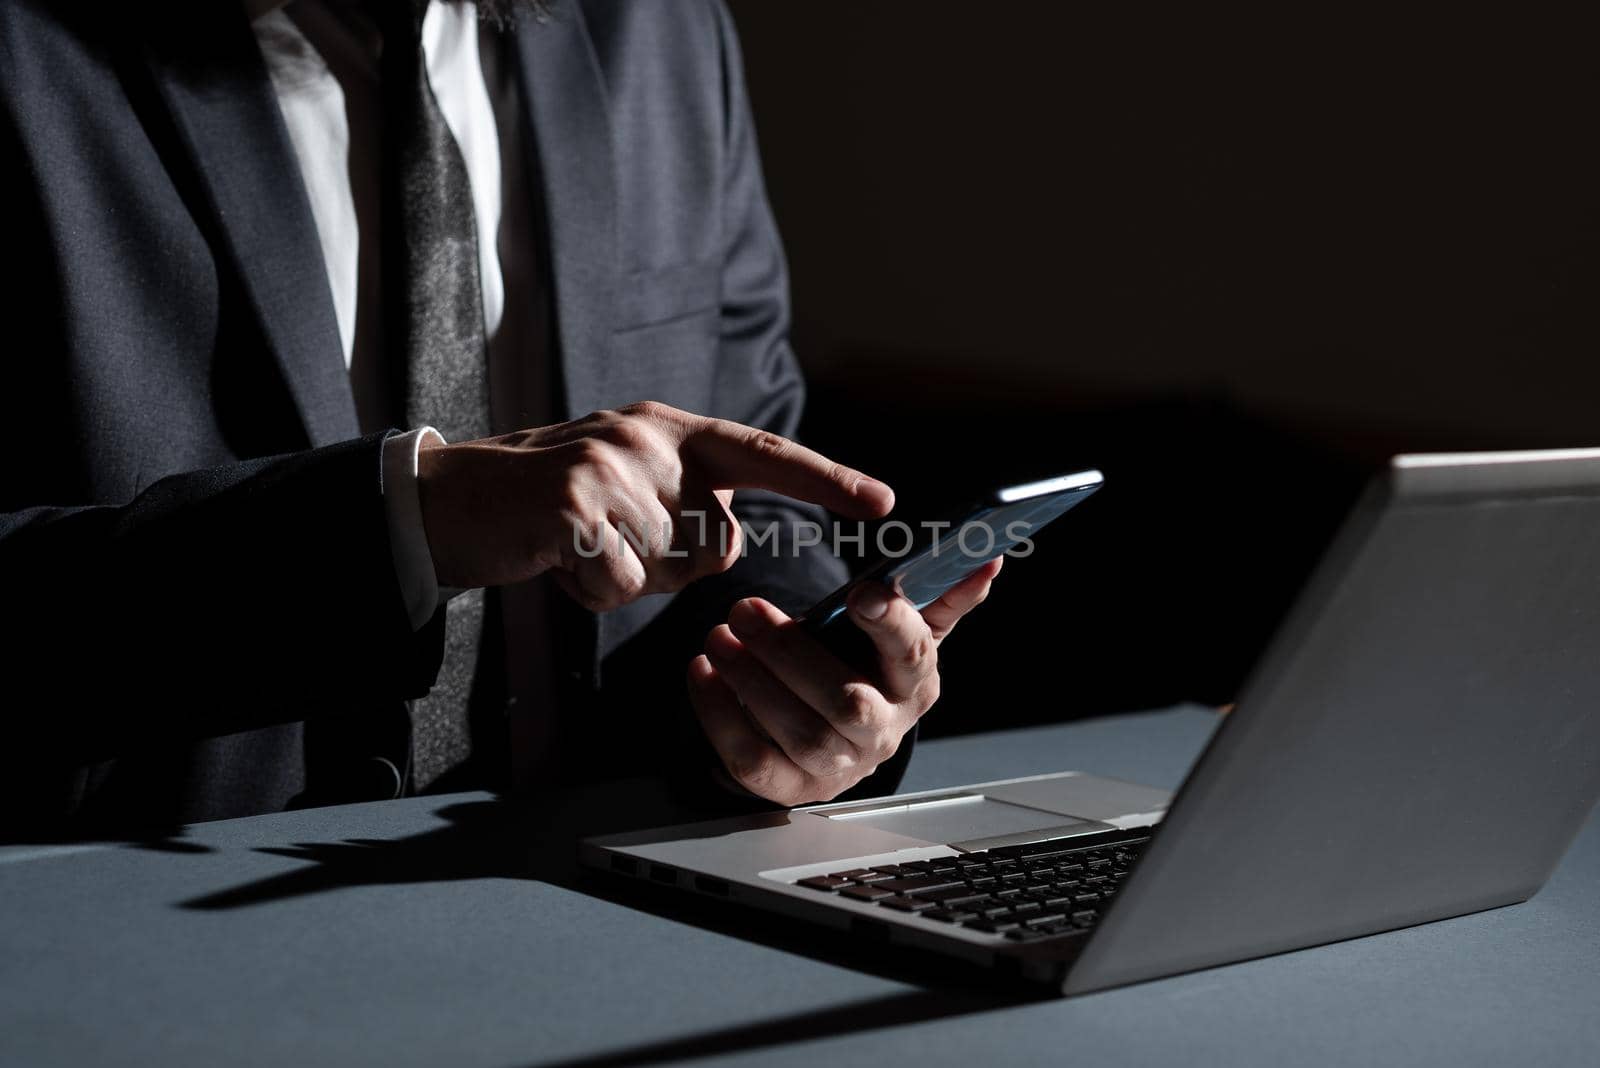 Businessman Holding Mobile Phone In Hand And Pointing With One Finger On It On Desk With Lap Top. Man Having Cellphone And Presenting Crutial Informations. by nialowwa